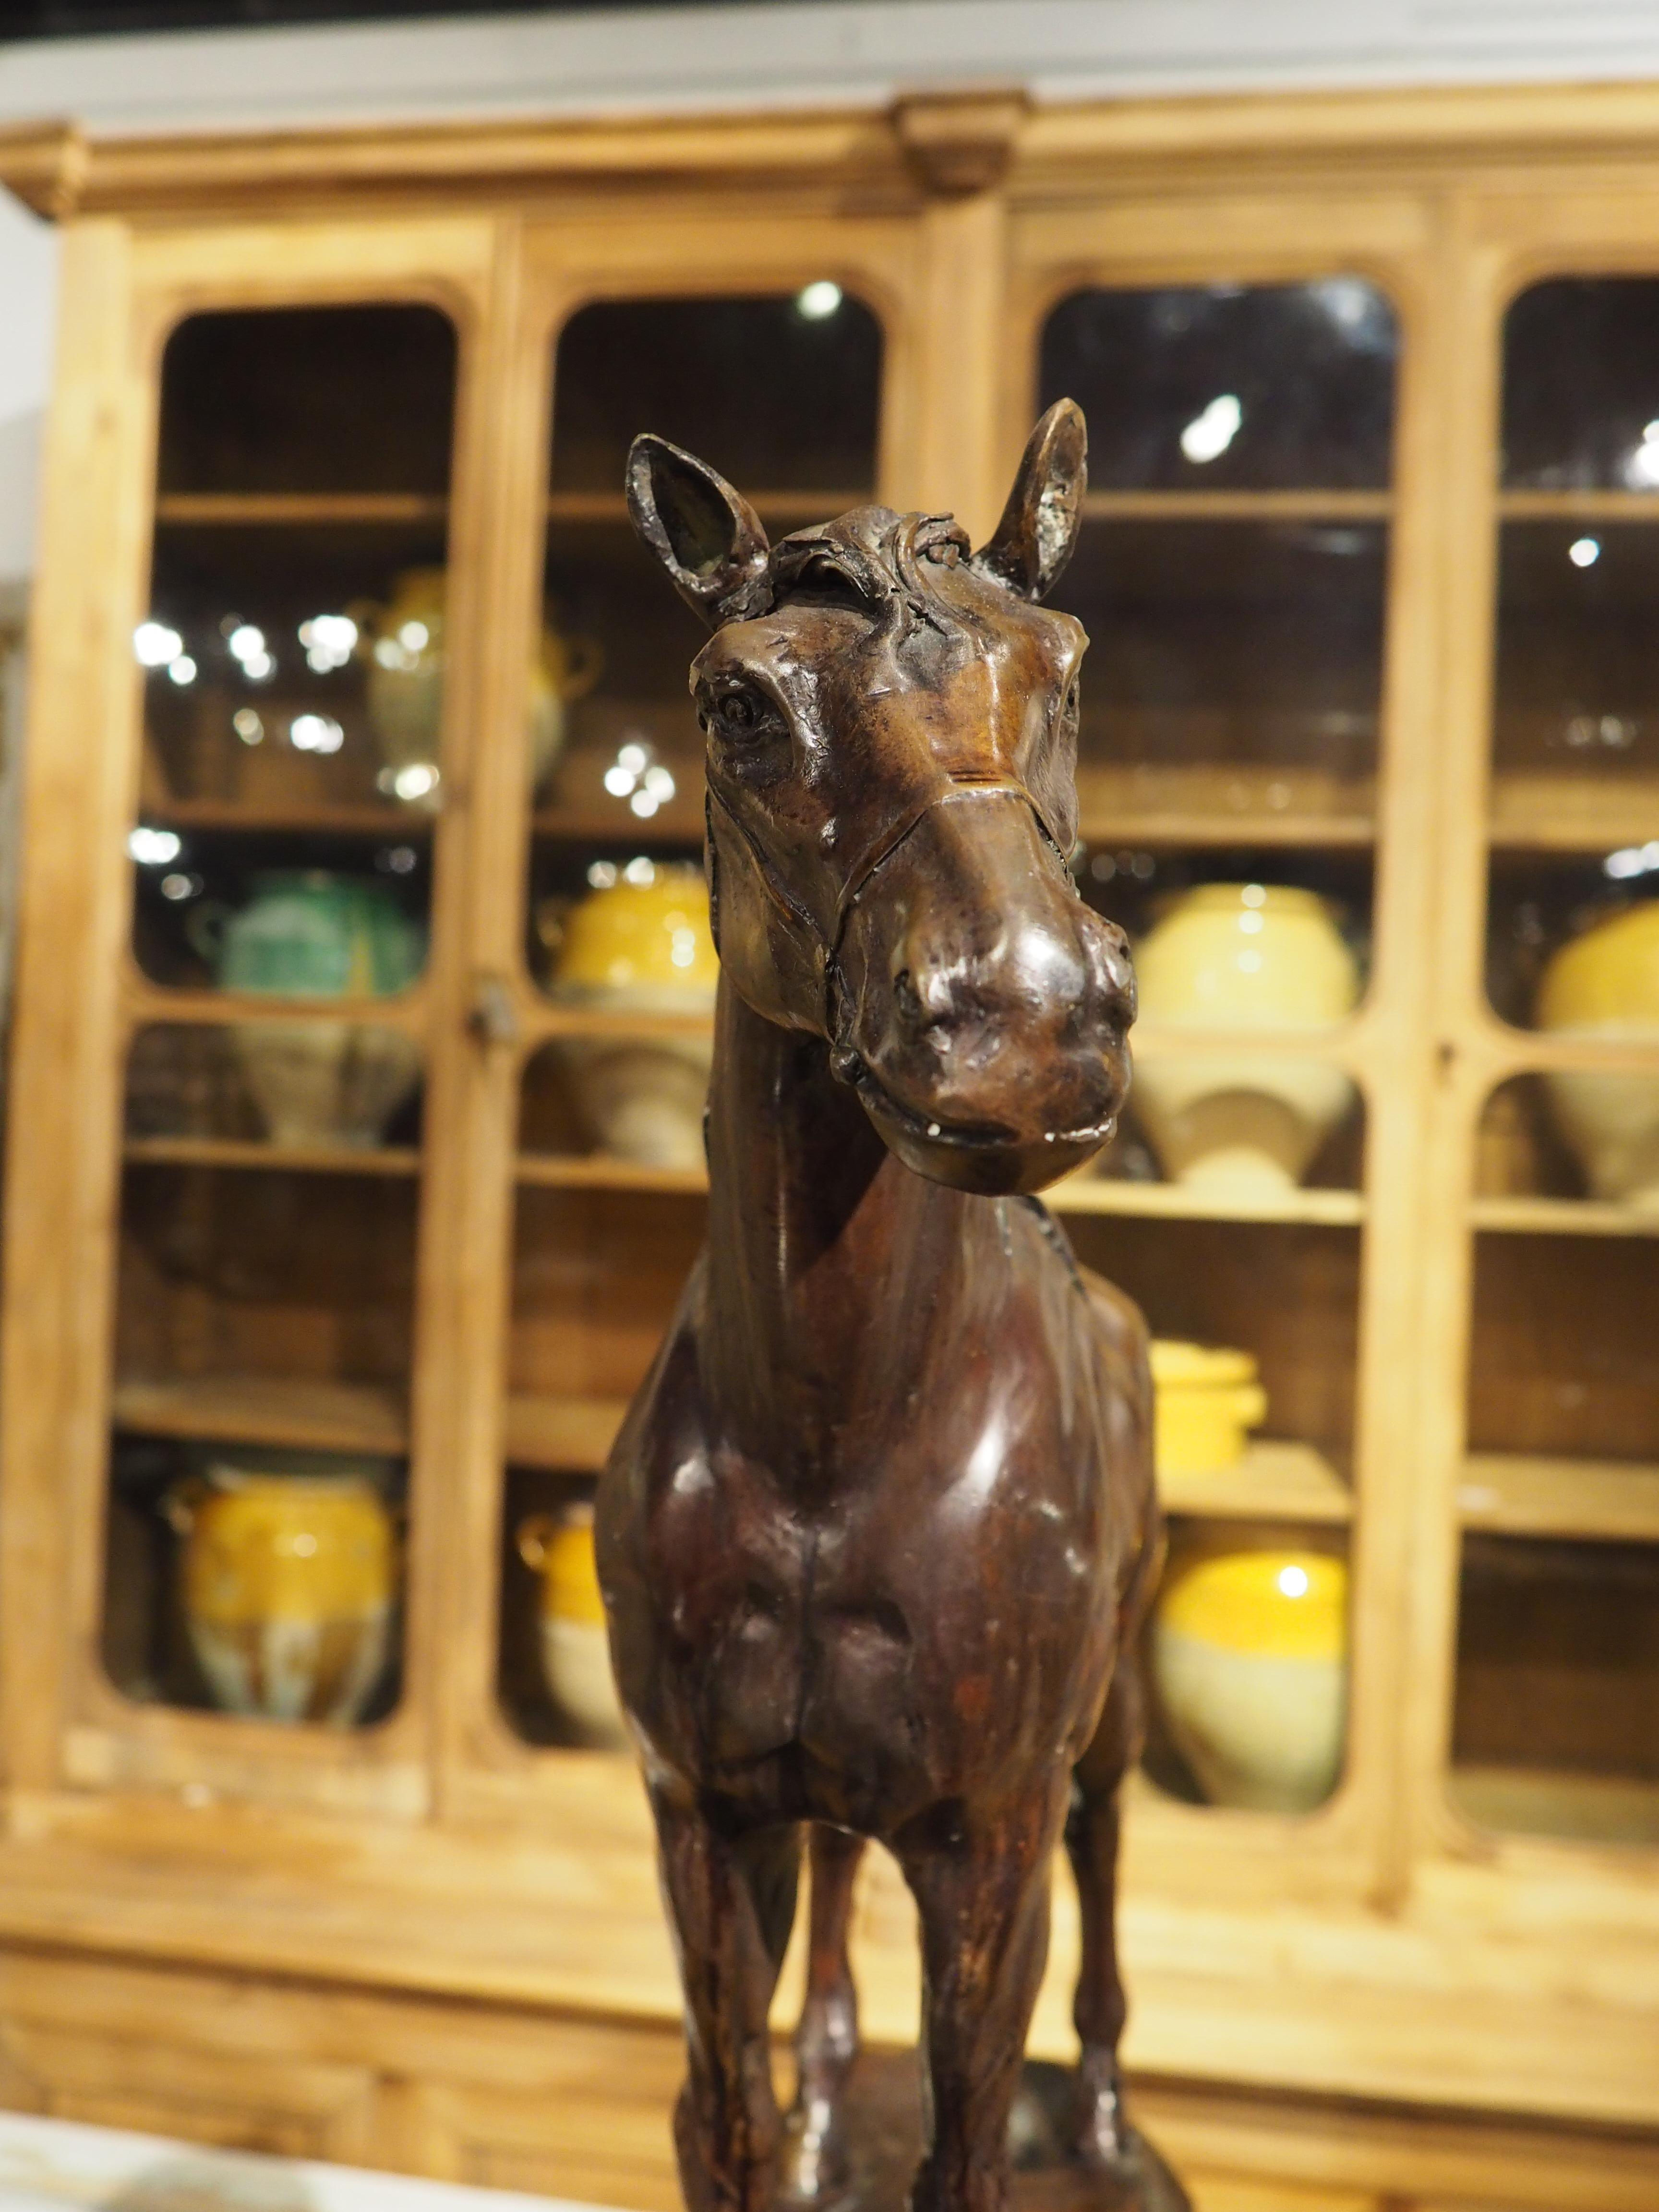 Cast and Patinated Bronze Sculpture of a Horse on Pedestal, H-29 1/4, 20th C. For Sale 4